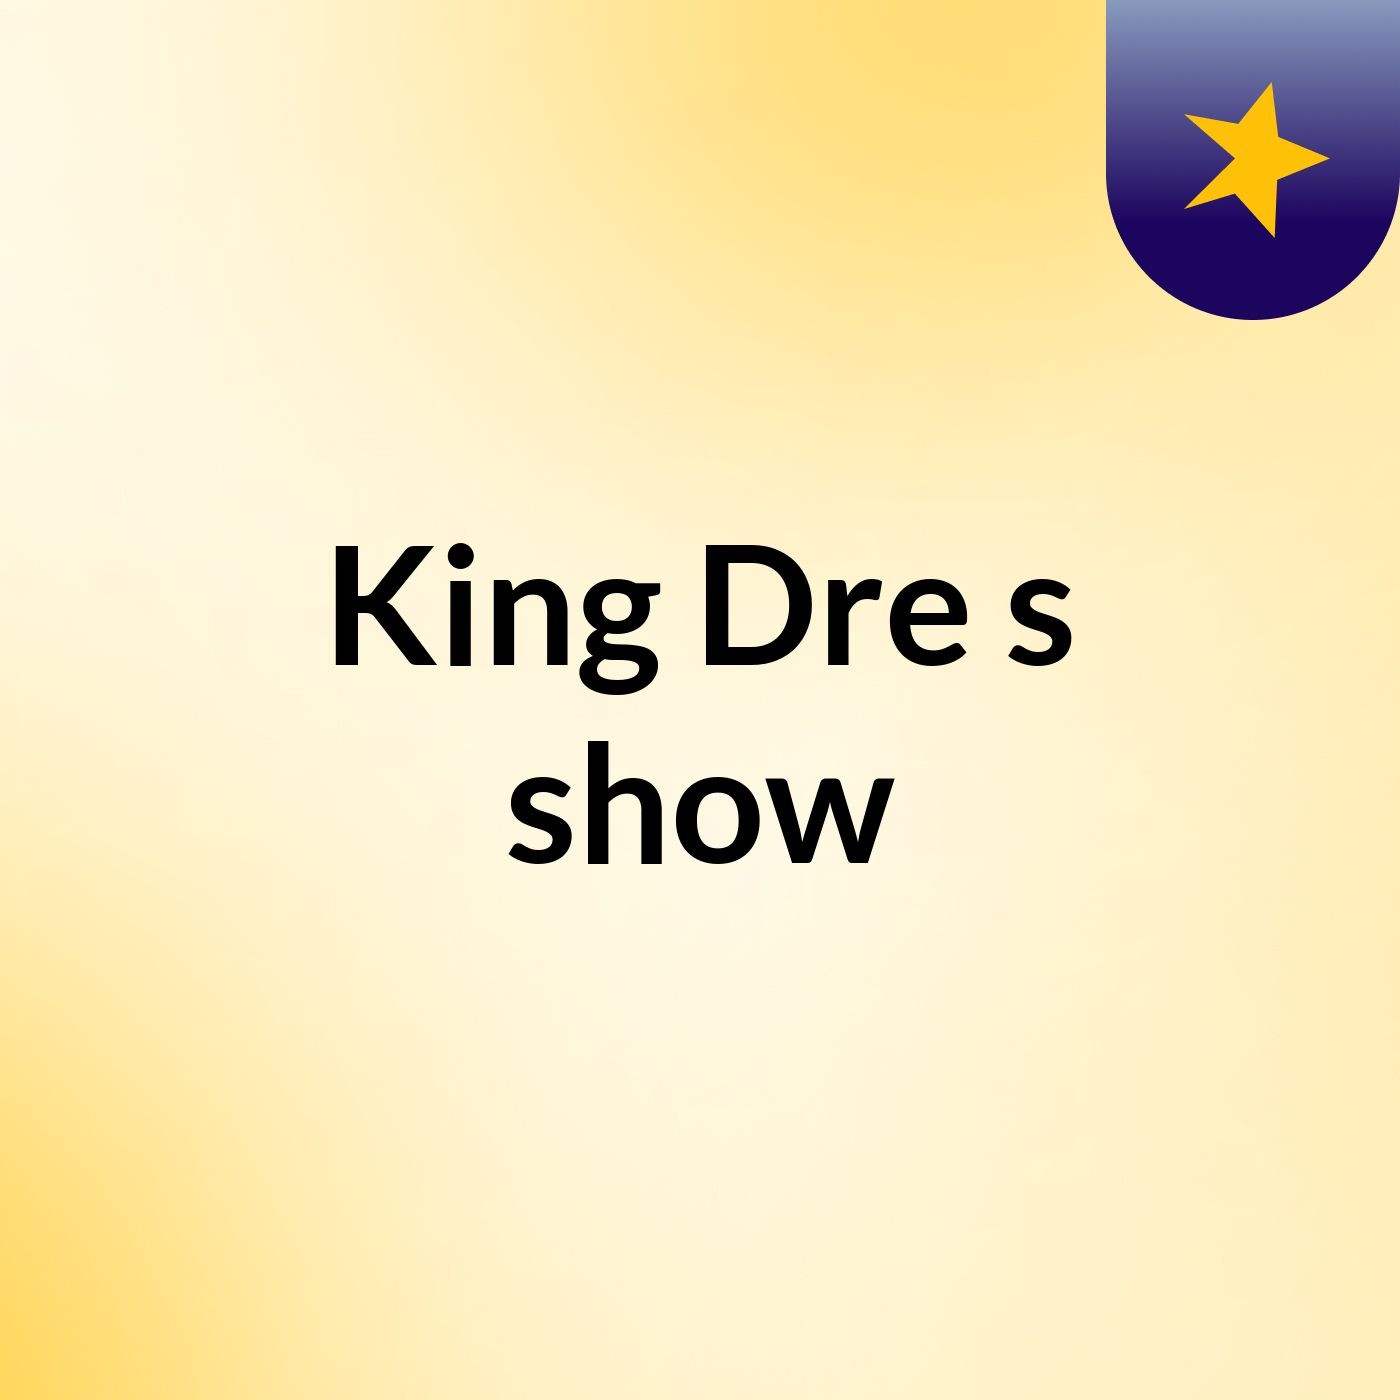 King Dre's show